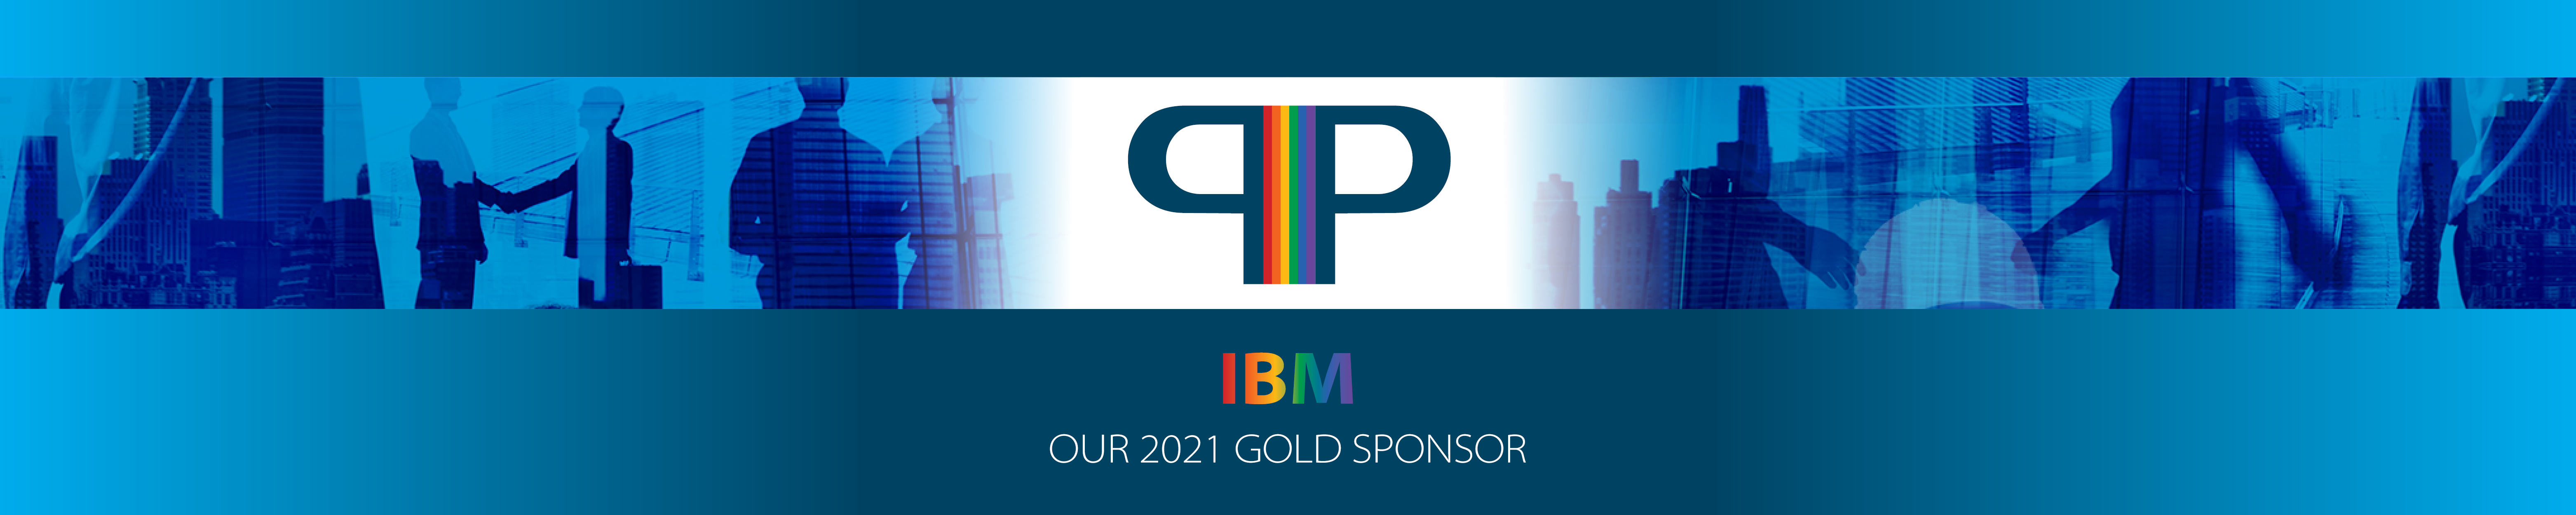 PIP_Conference_IBM_Gold_2021